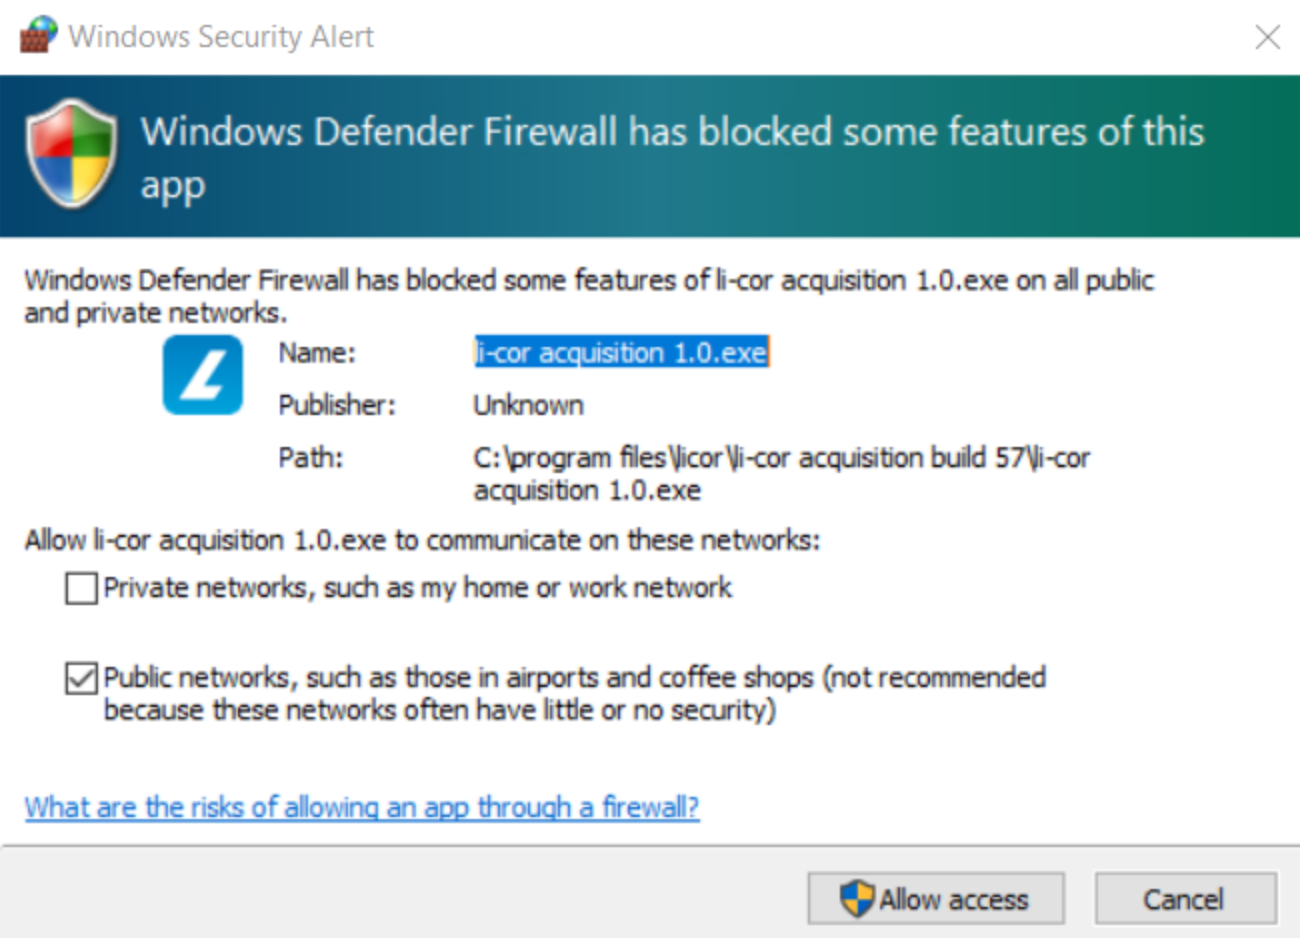 Dialog with information about Windows Defender Firewall blocking some features of LI‑COR Acquisition Software